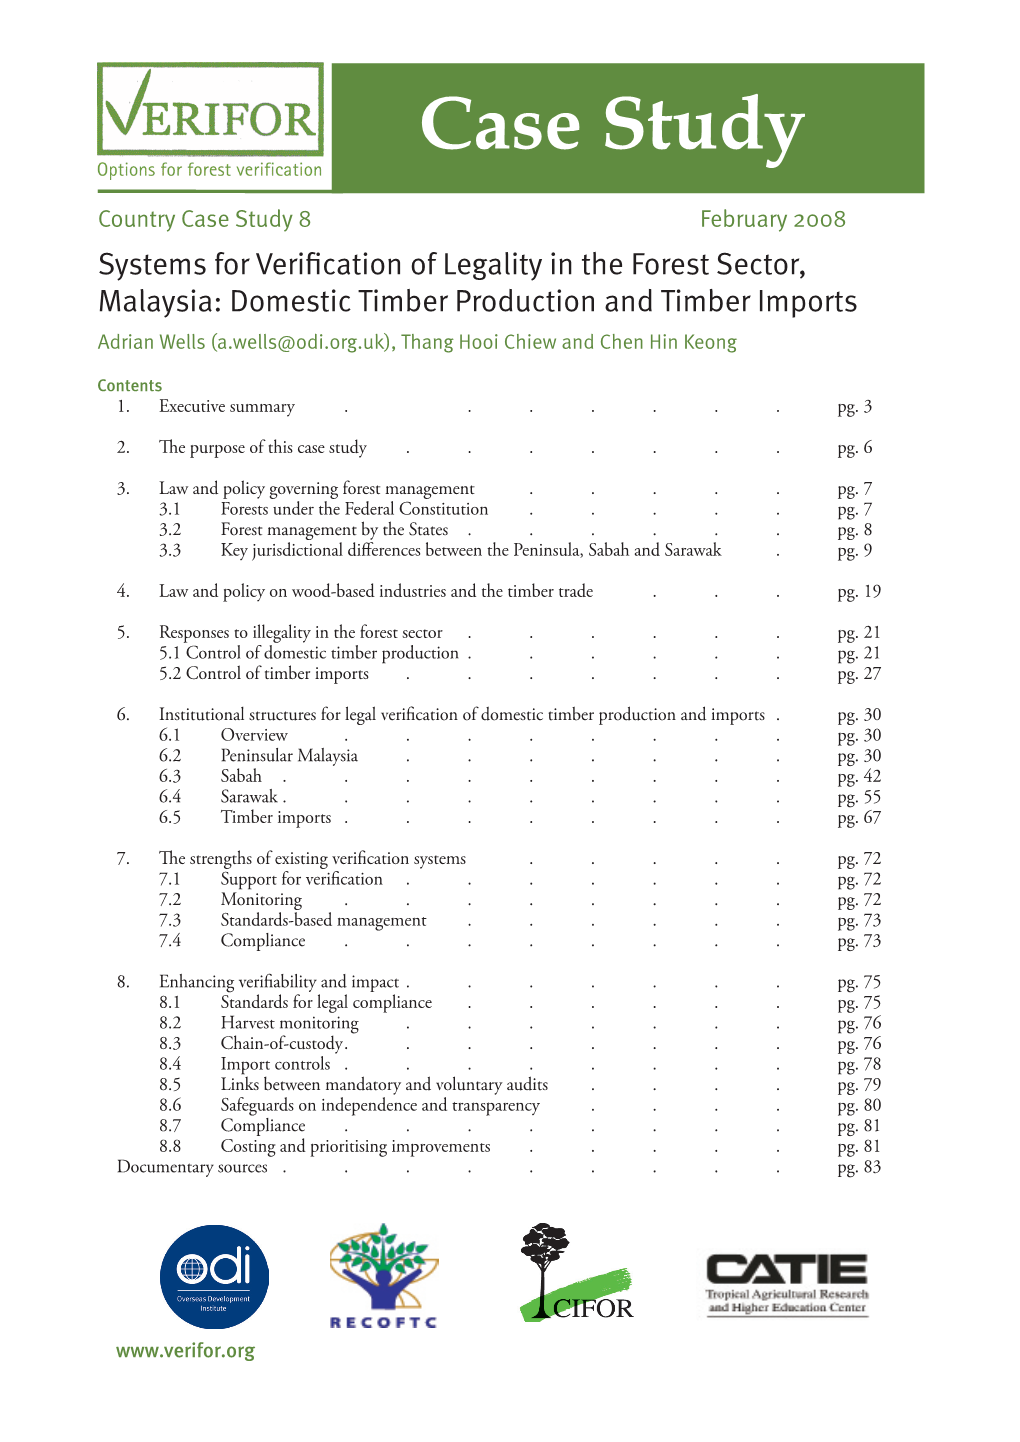 Systems for Verification of Legality in the Forest Sector, Malaysia